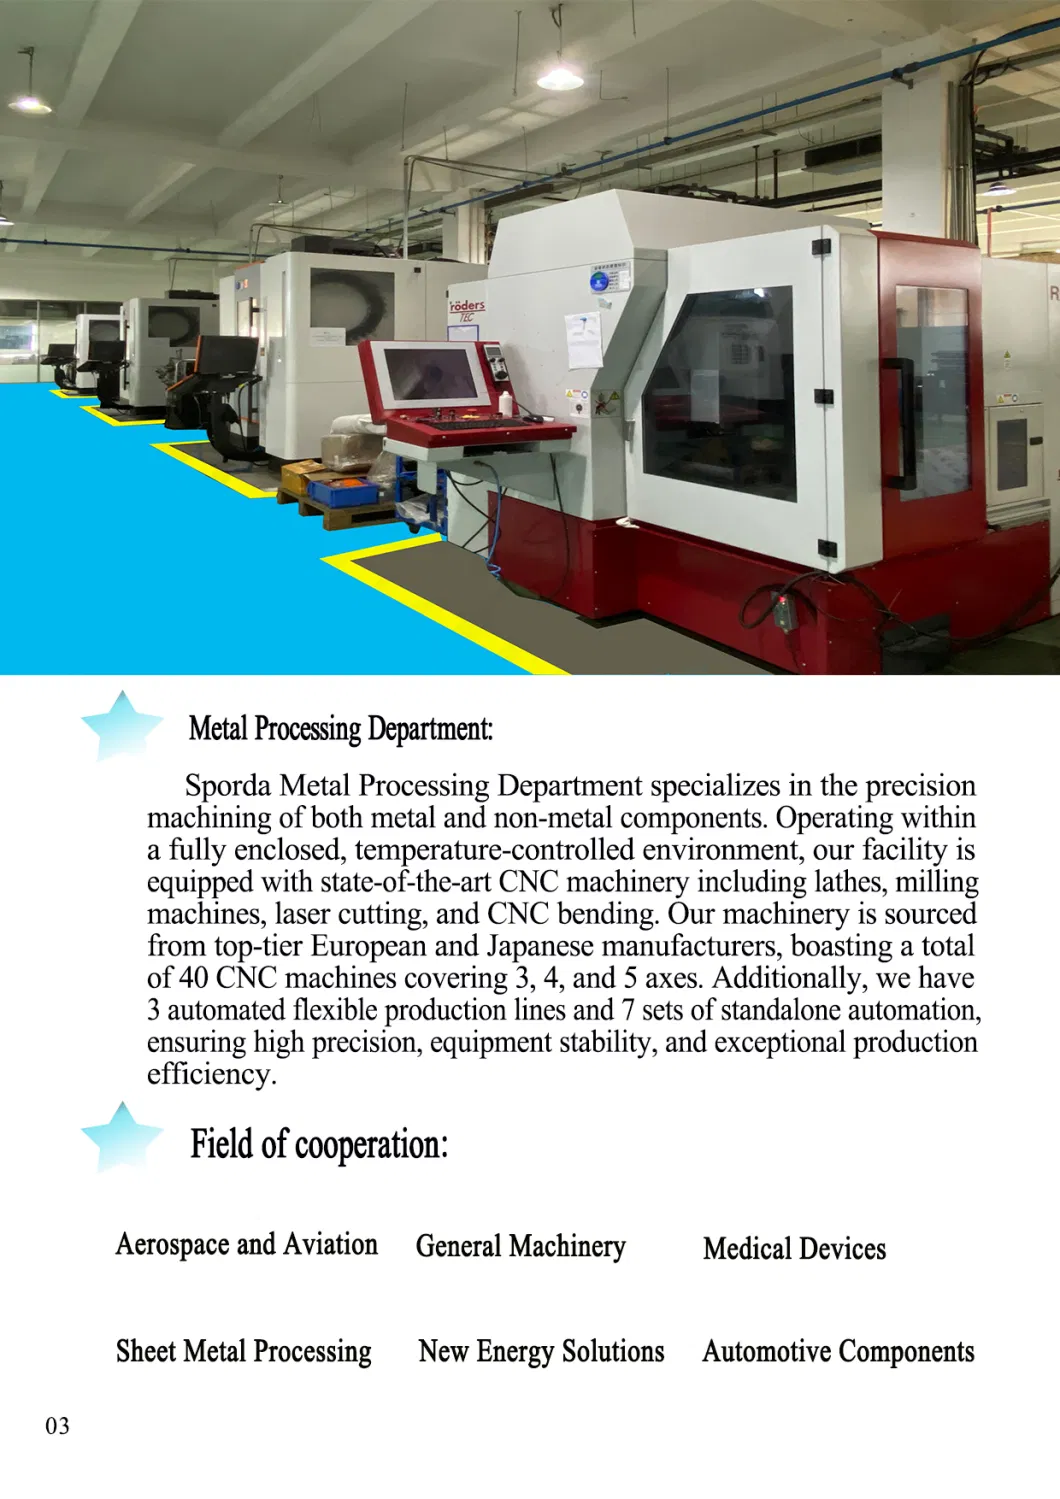 High-Precision Casting Experts Rapid CNC Machining Innovations